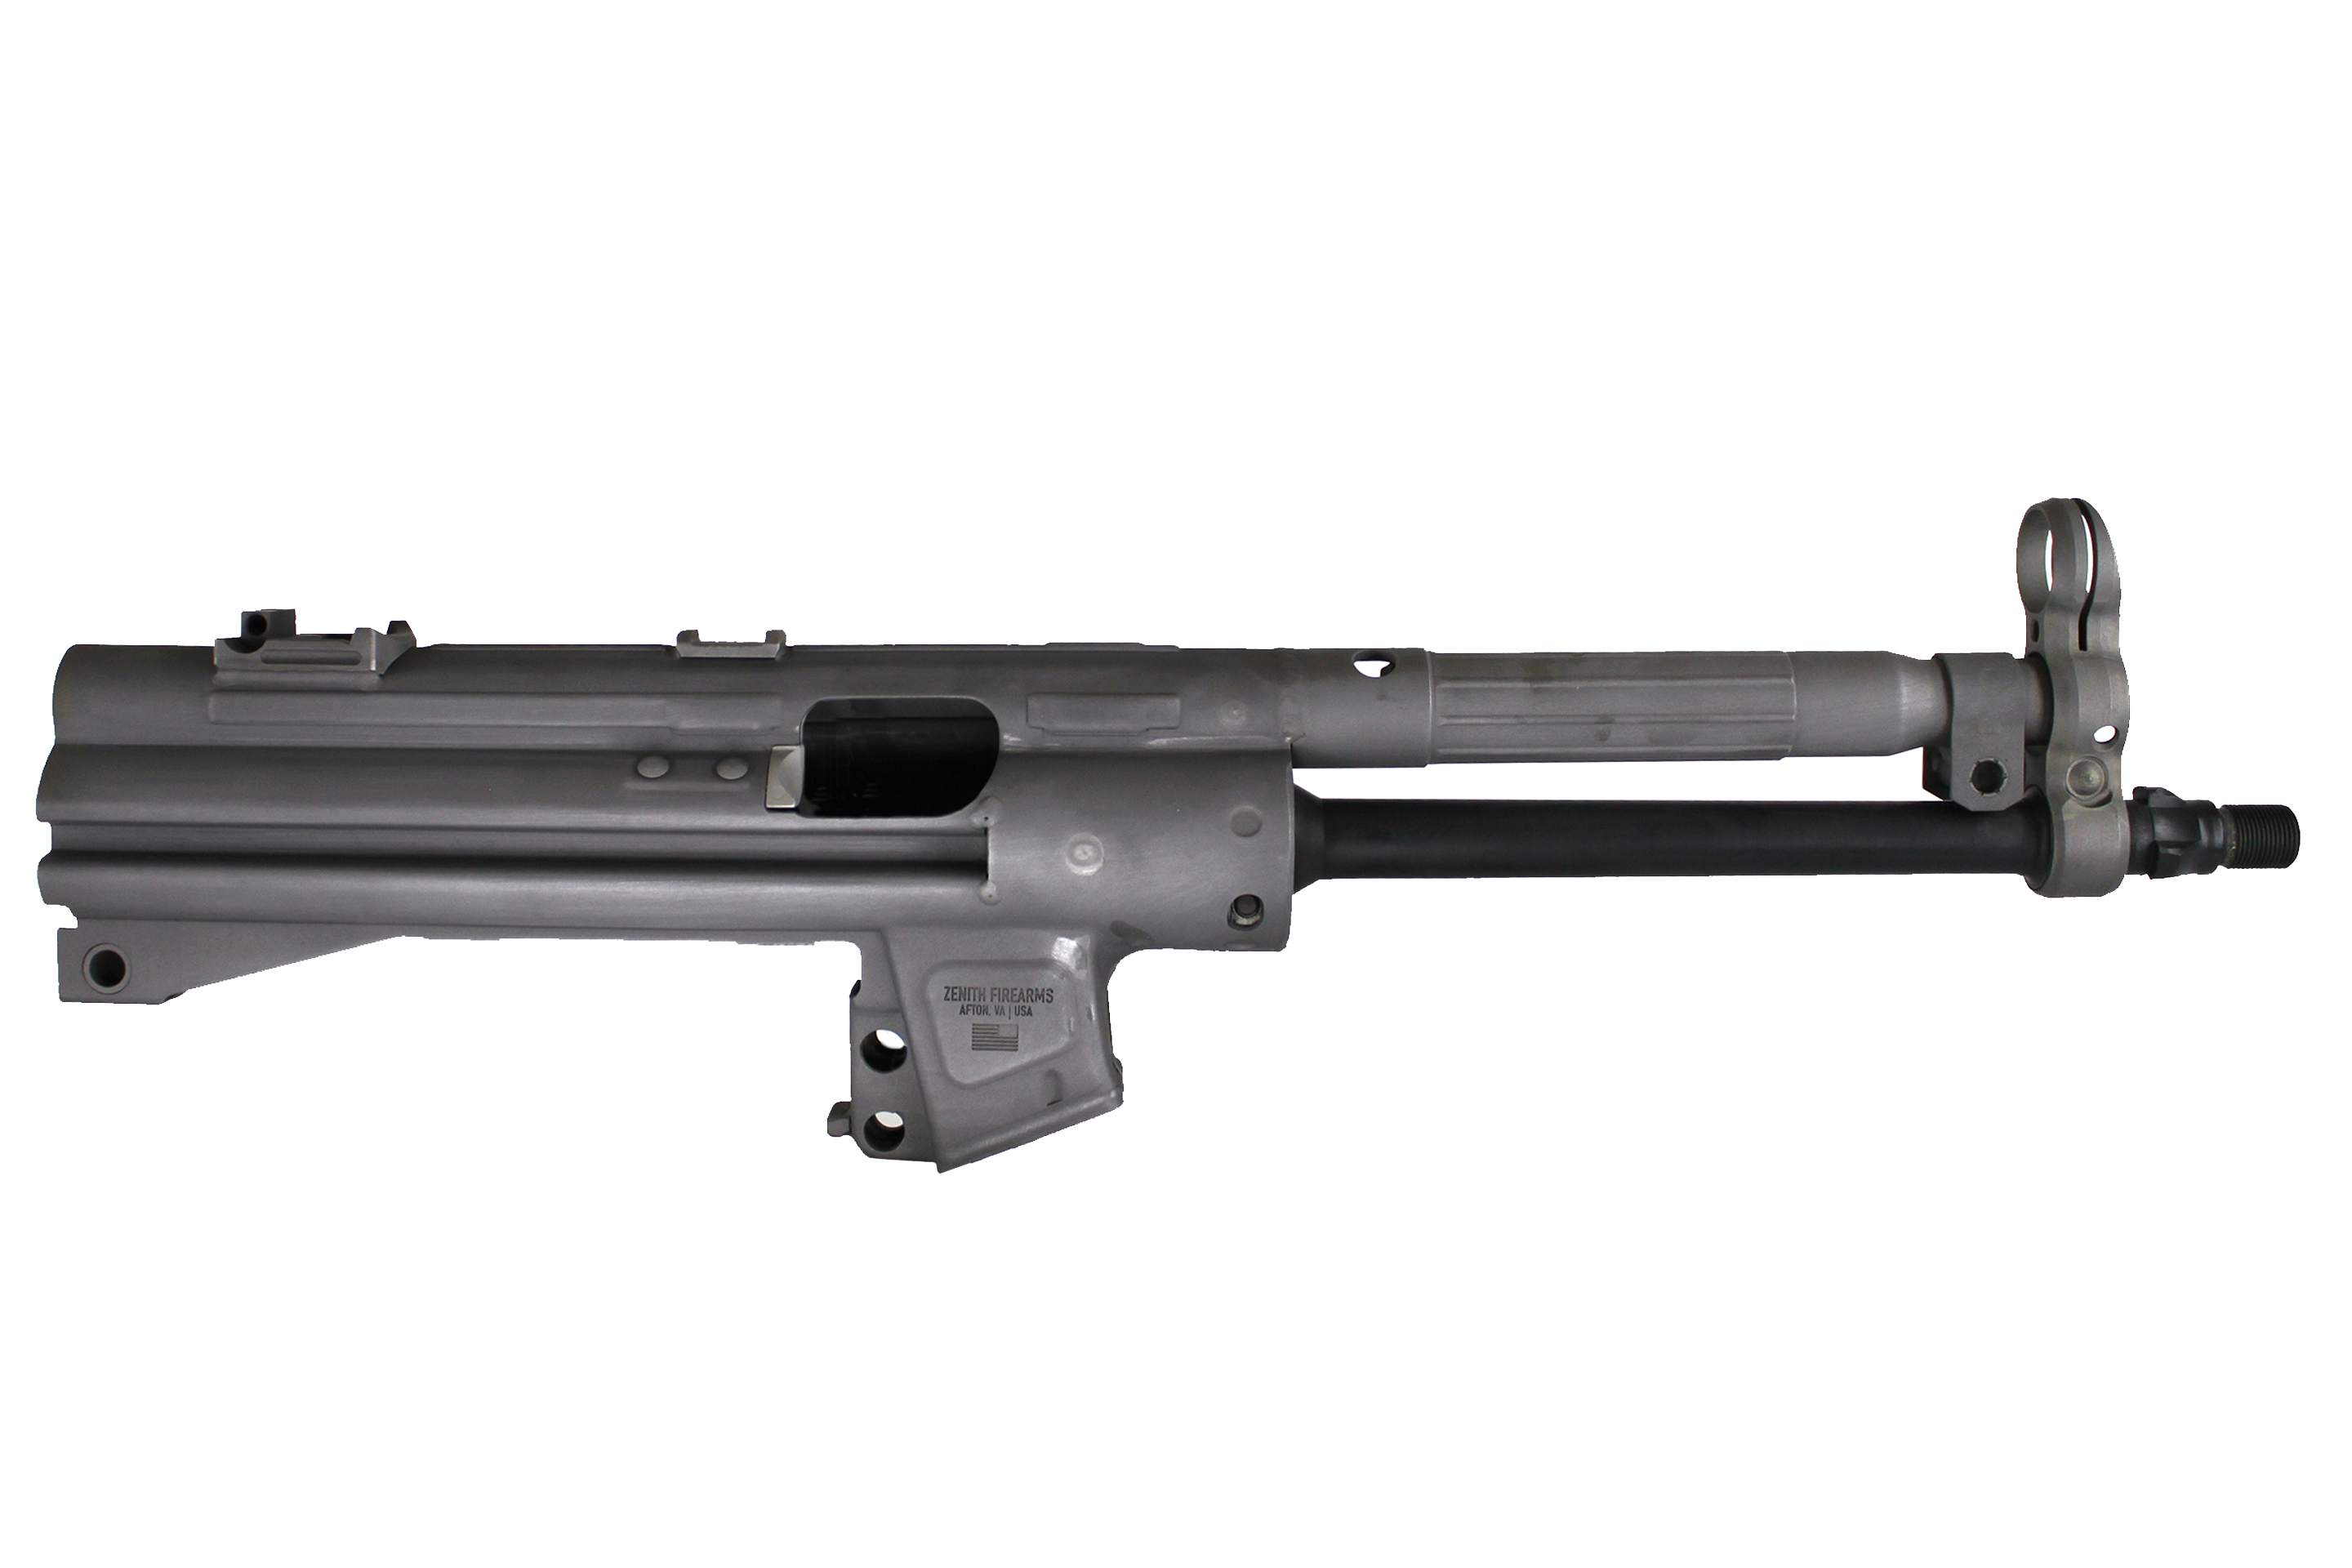 ZF-5 parkarized receiver with barrel, cocking tube, cocking bearer 